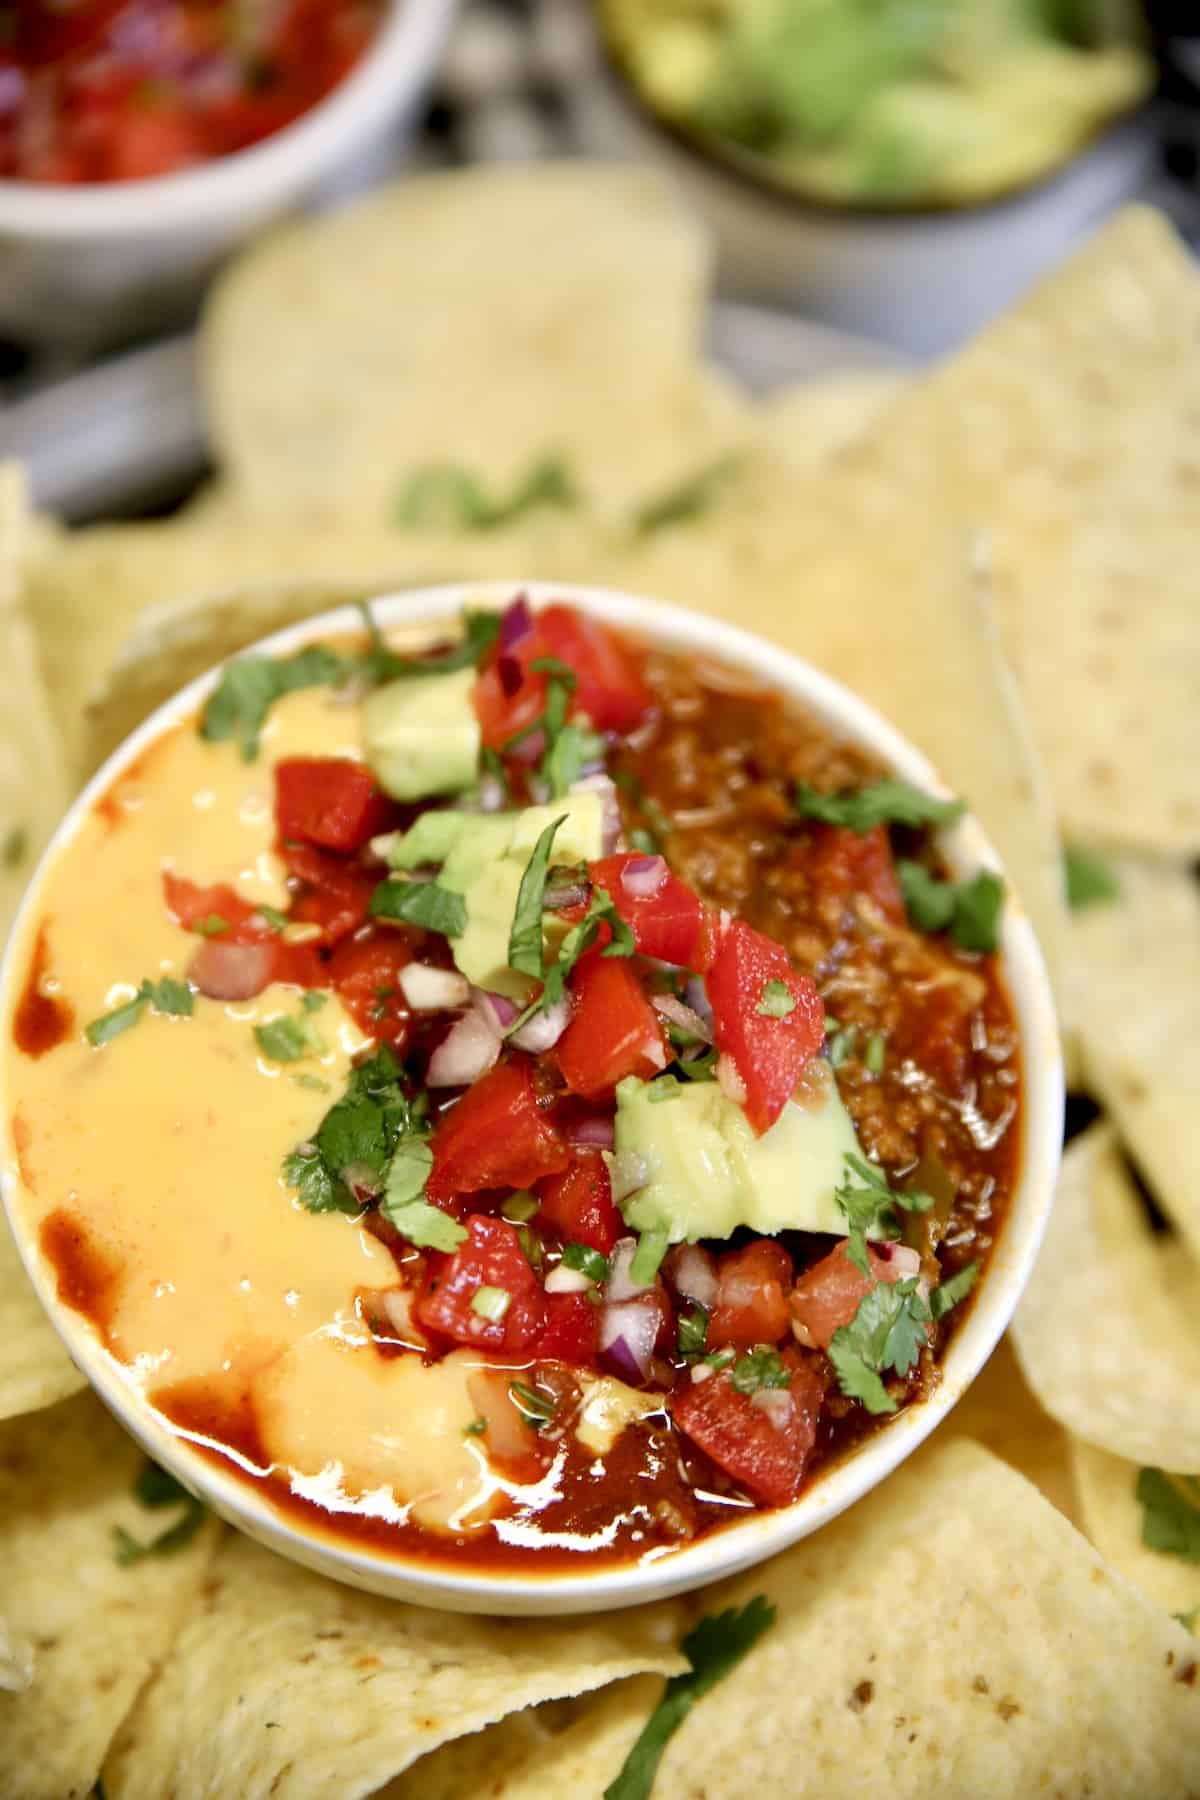 Bowl of chili queso dip with chips.